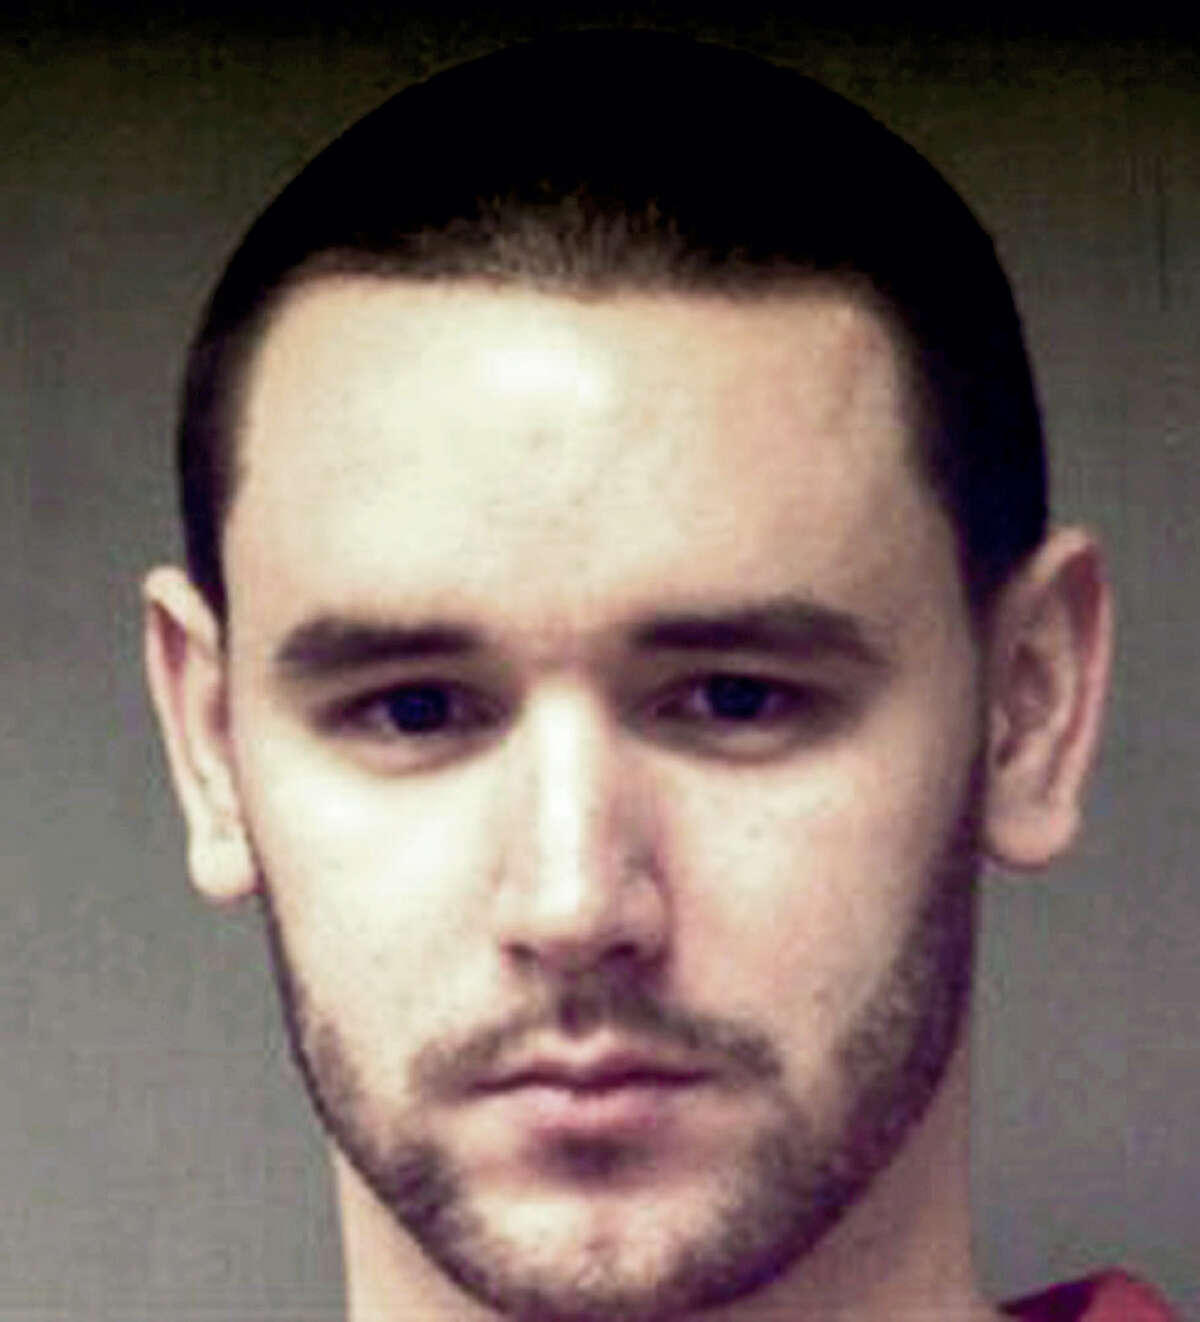 This March 14, 2011 photo released by the Connecticut Department of Correction shows Joshua Komisarjevsky, sentenced to death on several counts related to the beating of Dr. William Petit Jr., and killing his wife Jennifer Hawke-Petit and their two daughters in a July 2007 home invasion in Cheshire, Conn.